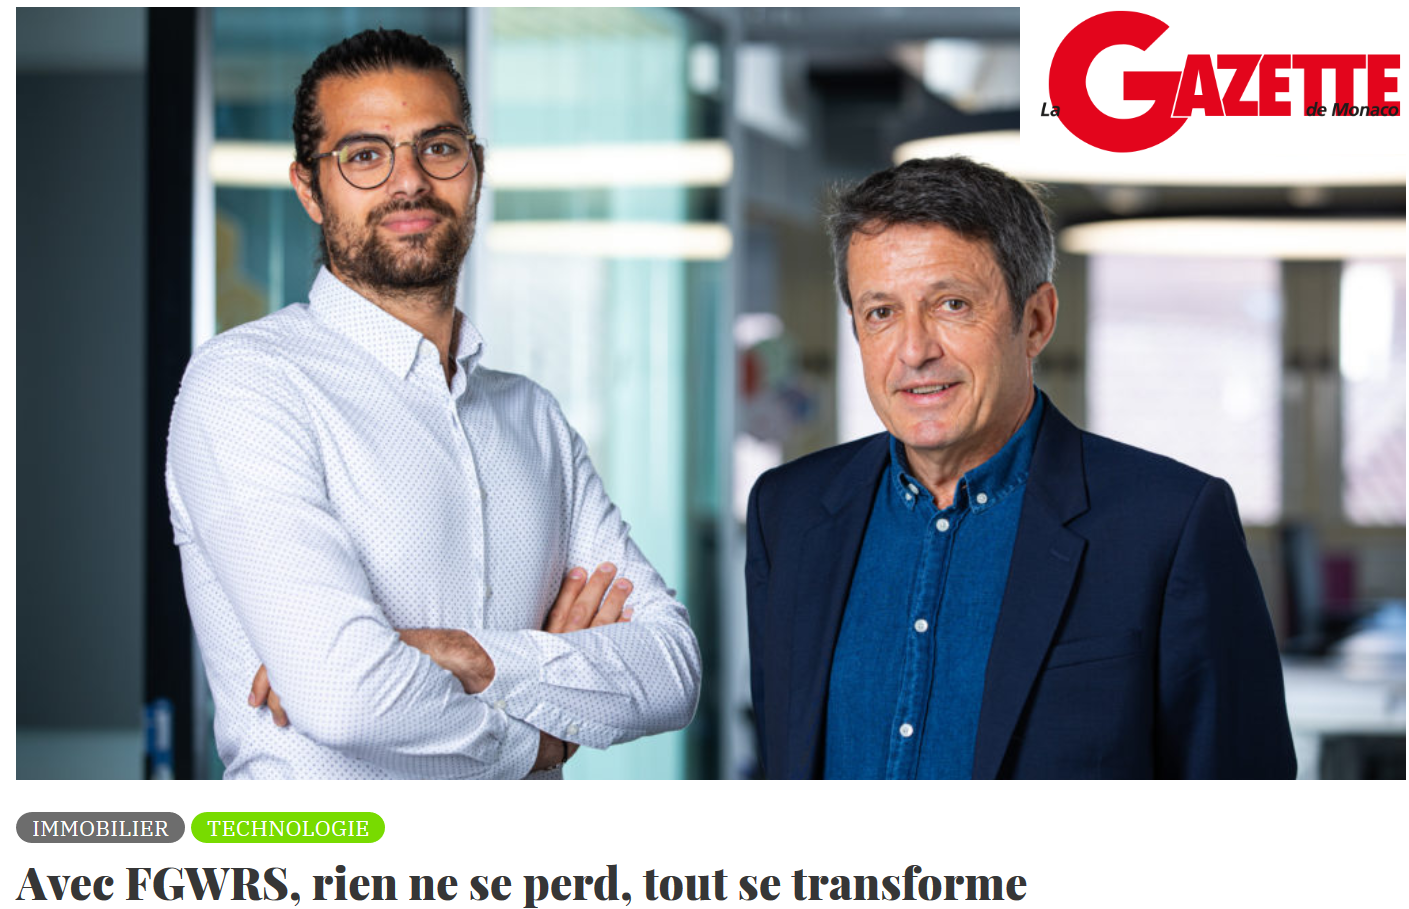 « With FGWRS®, Nothing Is Lost, Everything Is Transformed” Article In La Gazette De Monaco